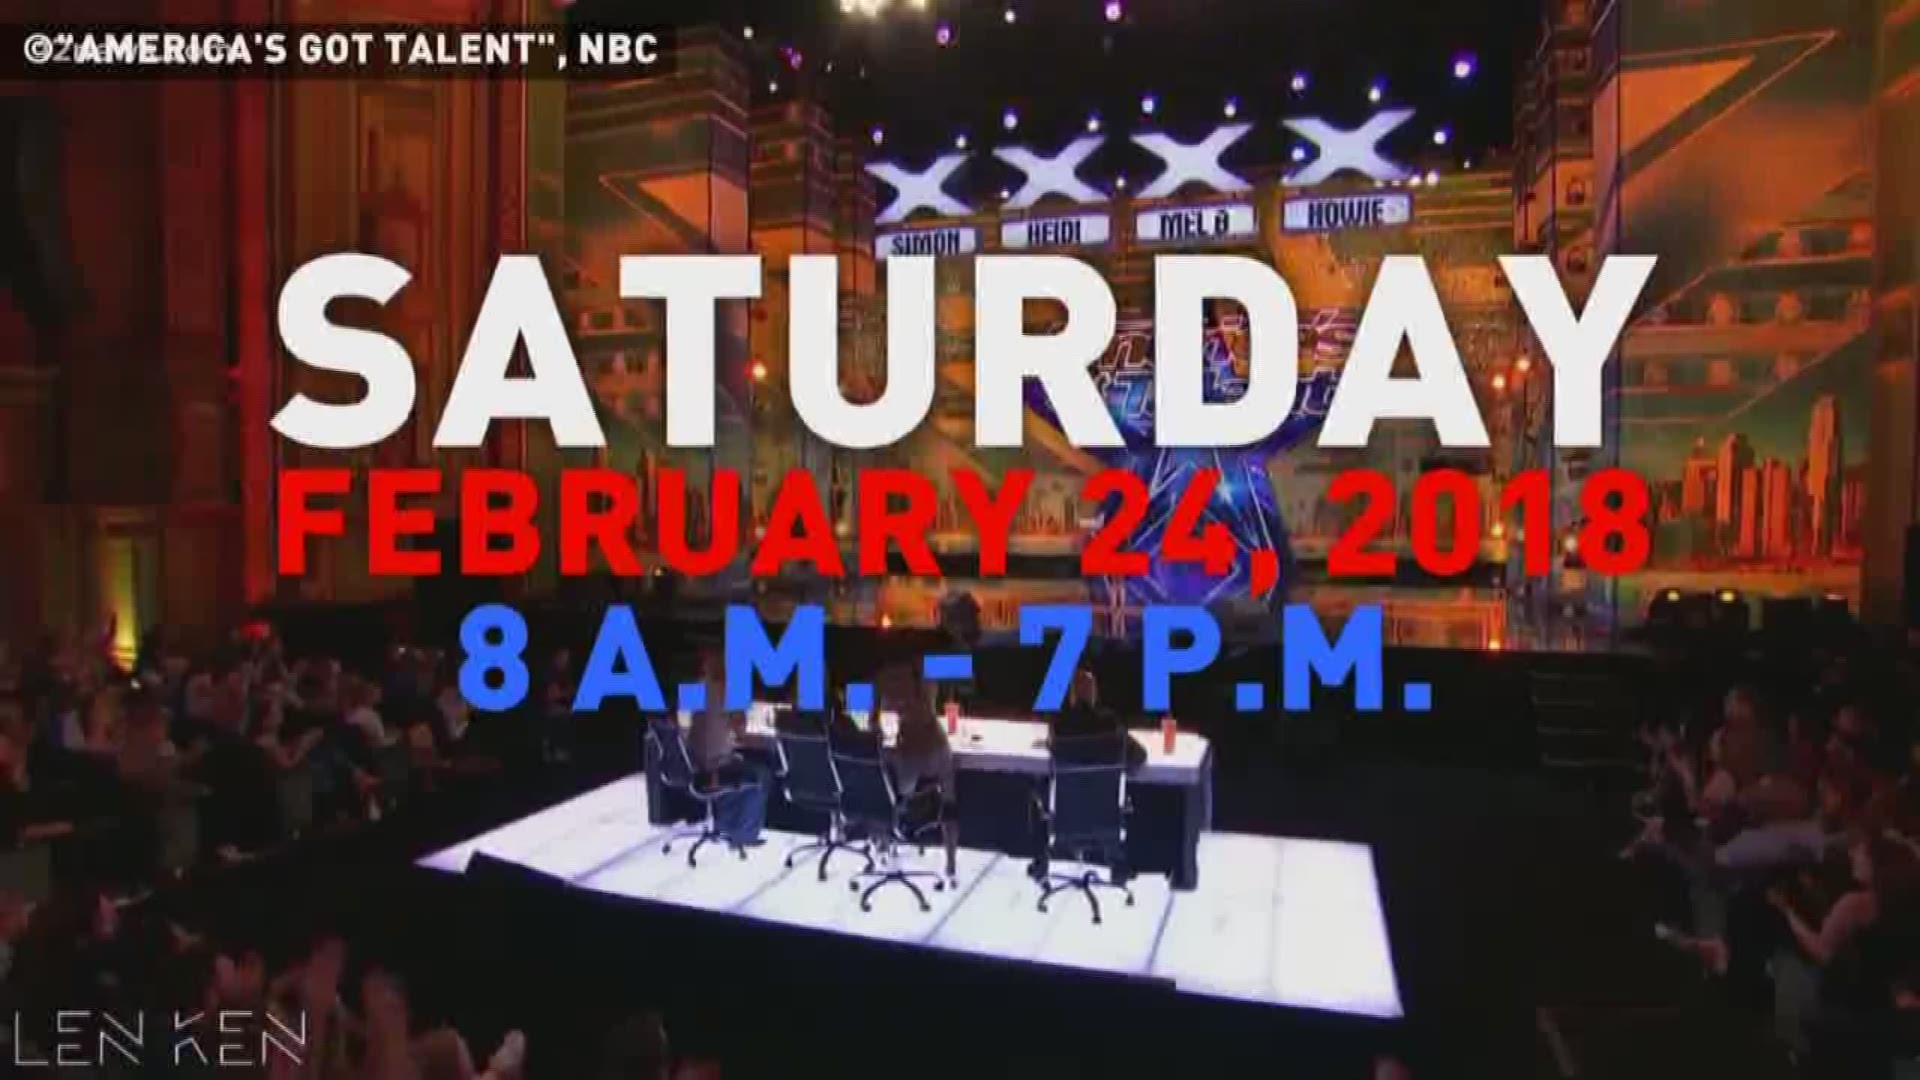 "America's Got Talent" will be in Phoenix searching for talented individuals in February.